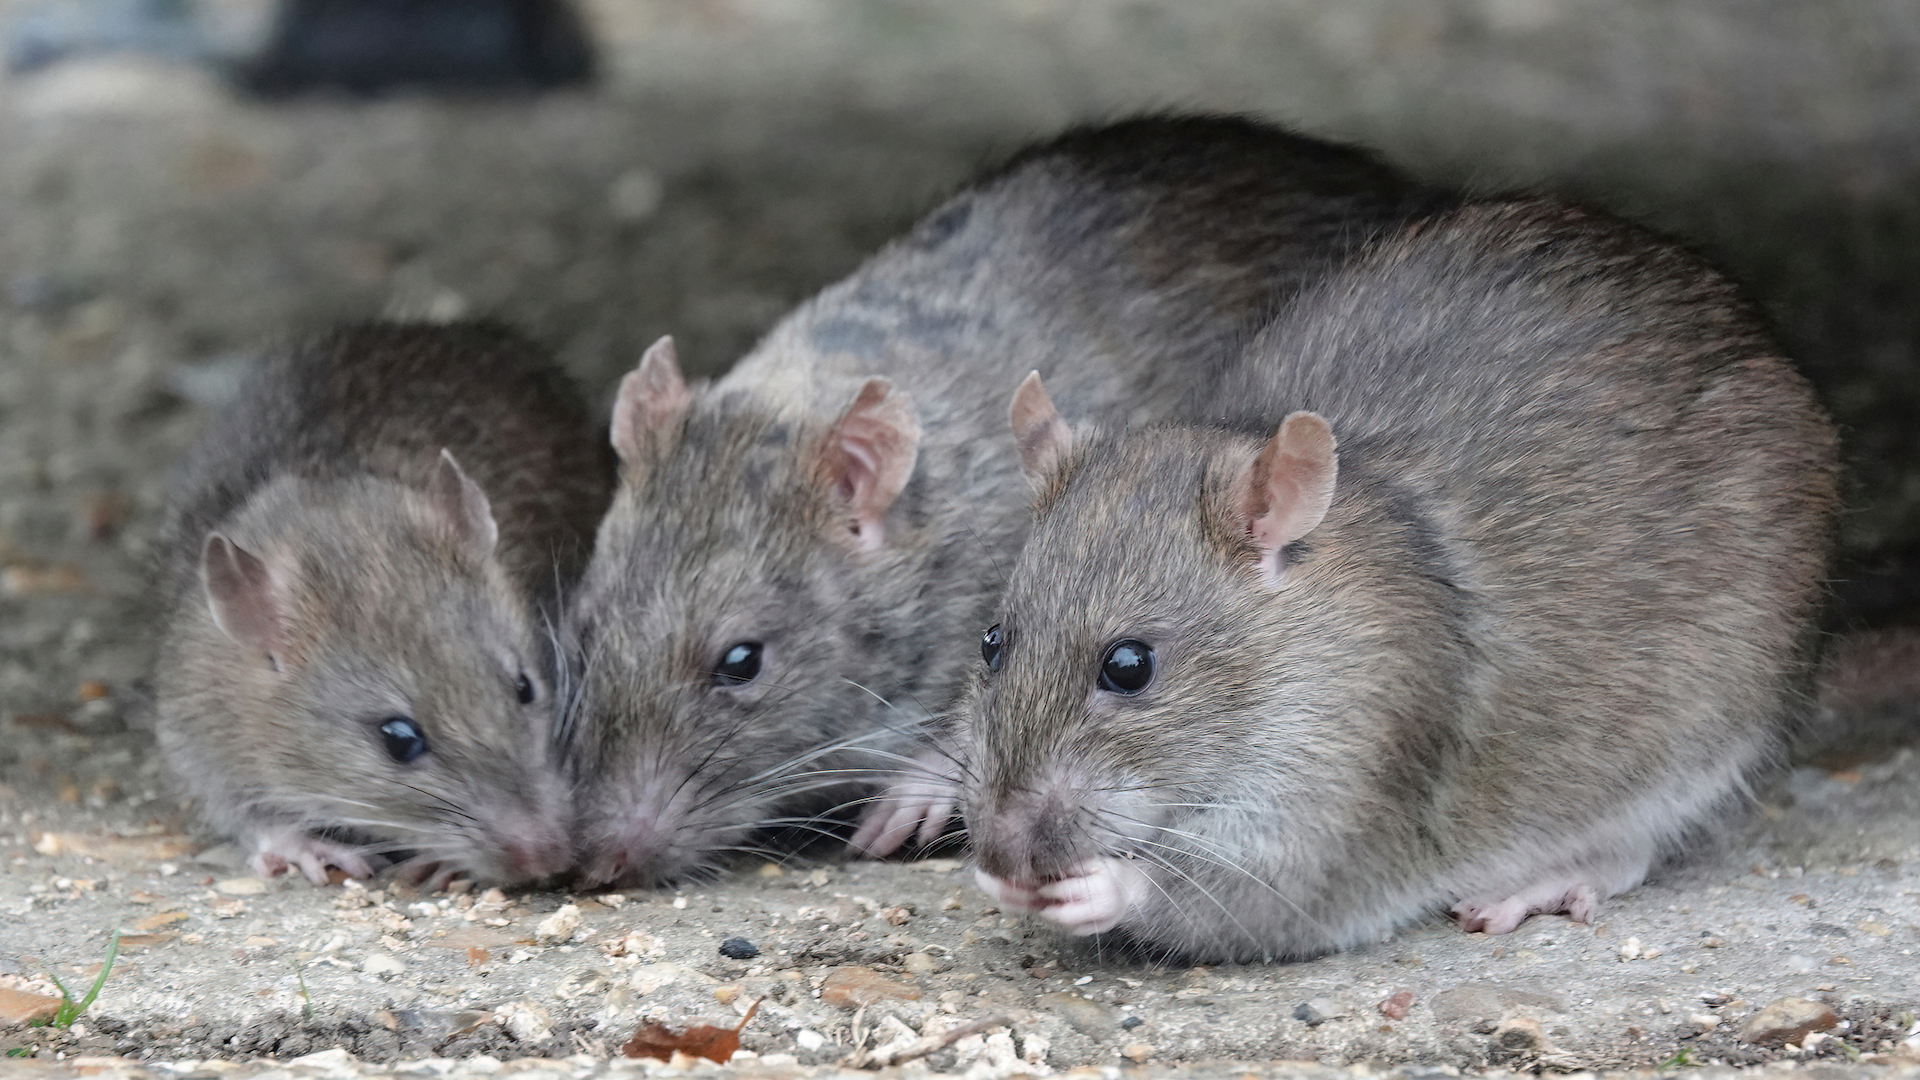 A photograph of a small group of rats eating scraps of food in a park